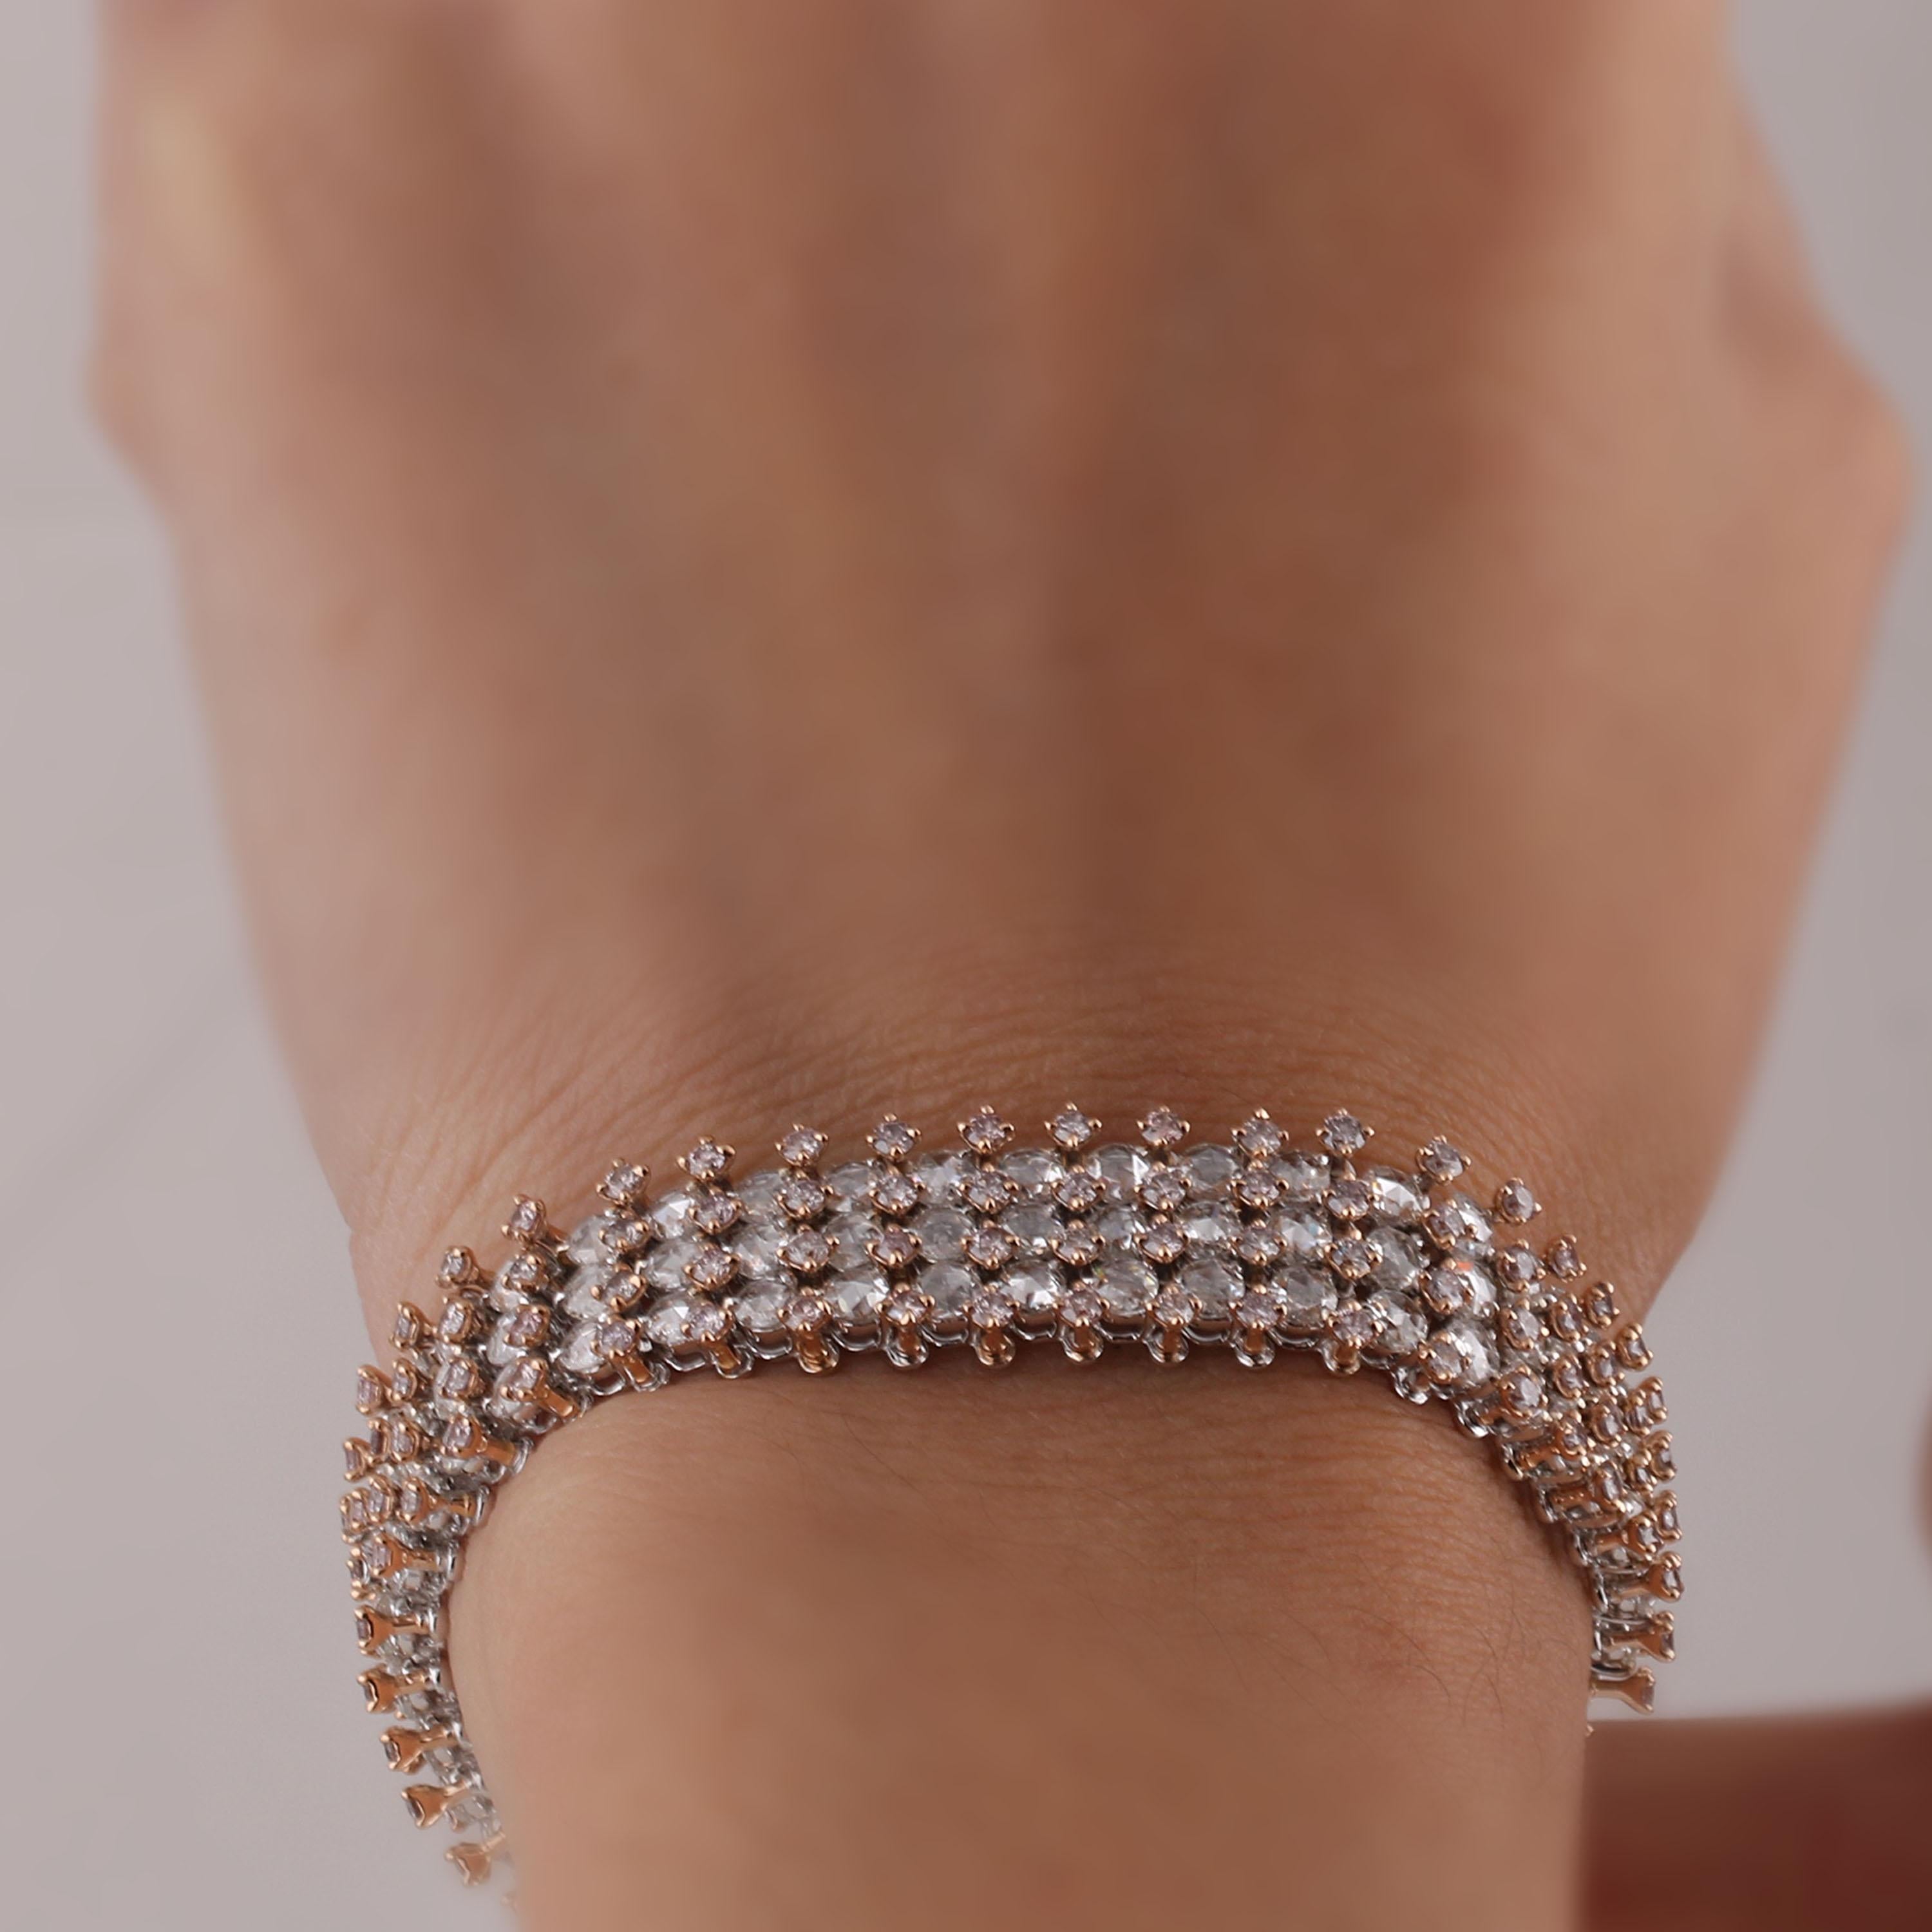 Gross Weight: 33.56 Grams
Diamond Weight: 13.39 cts
Tennis Bracelet Size: 7 Inches (Resizing Can be Done)
IGI Certification can be done upon Request

Video of the product can be shared on request.

Make minimalism your modus operandi with this